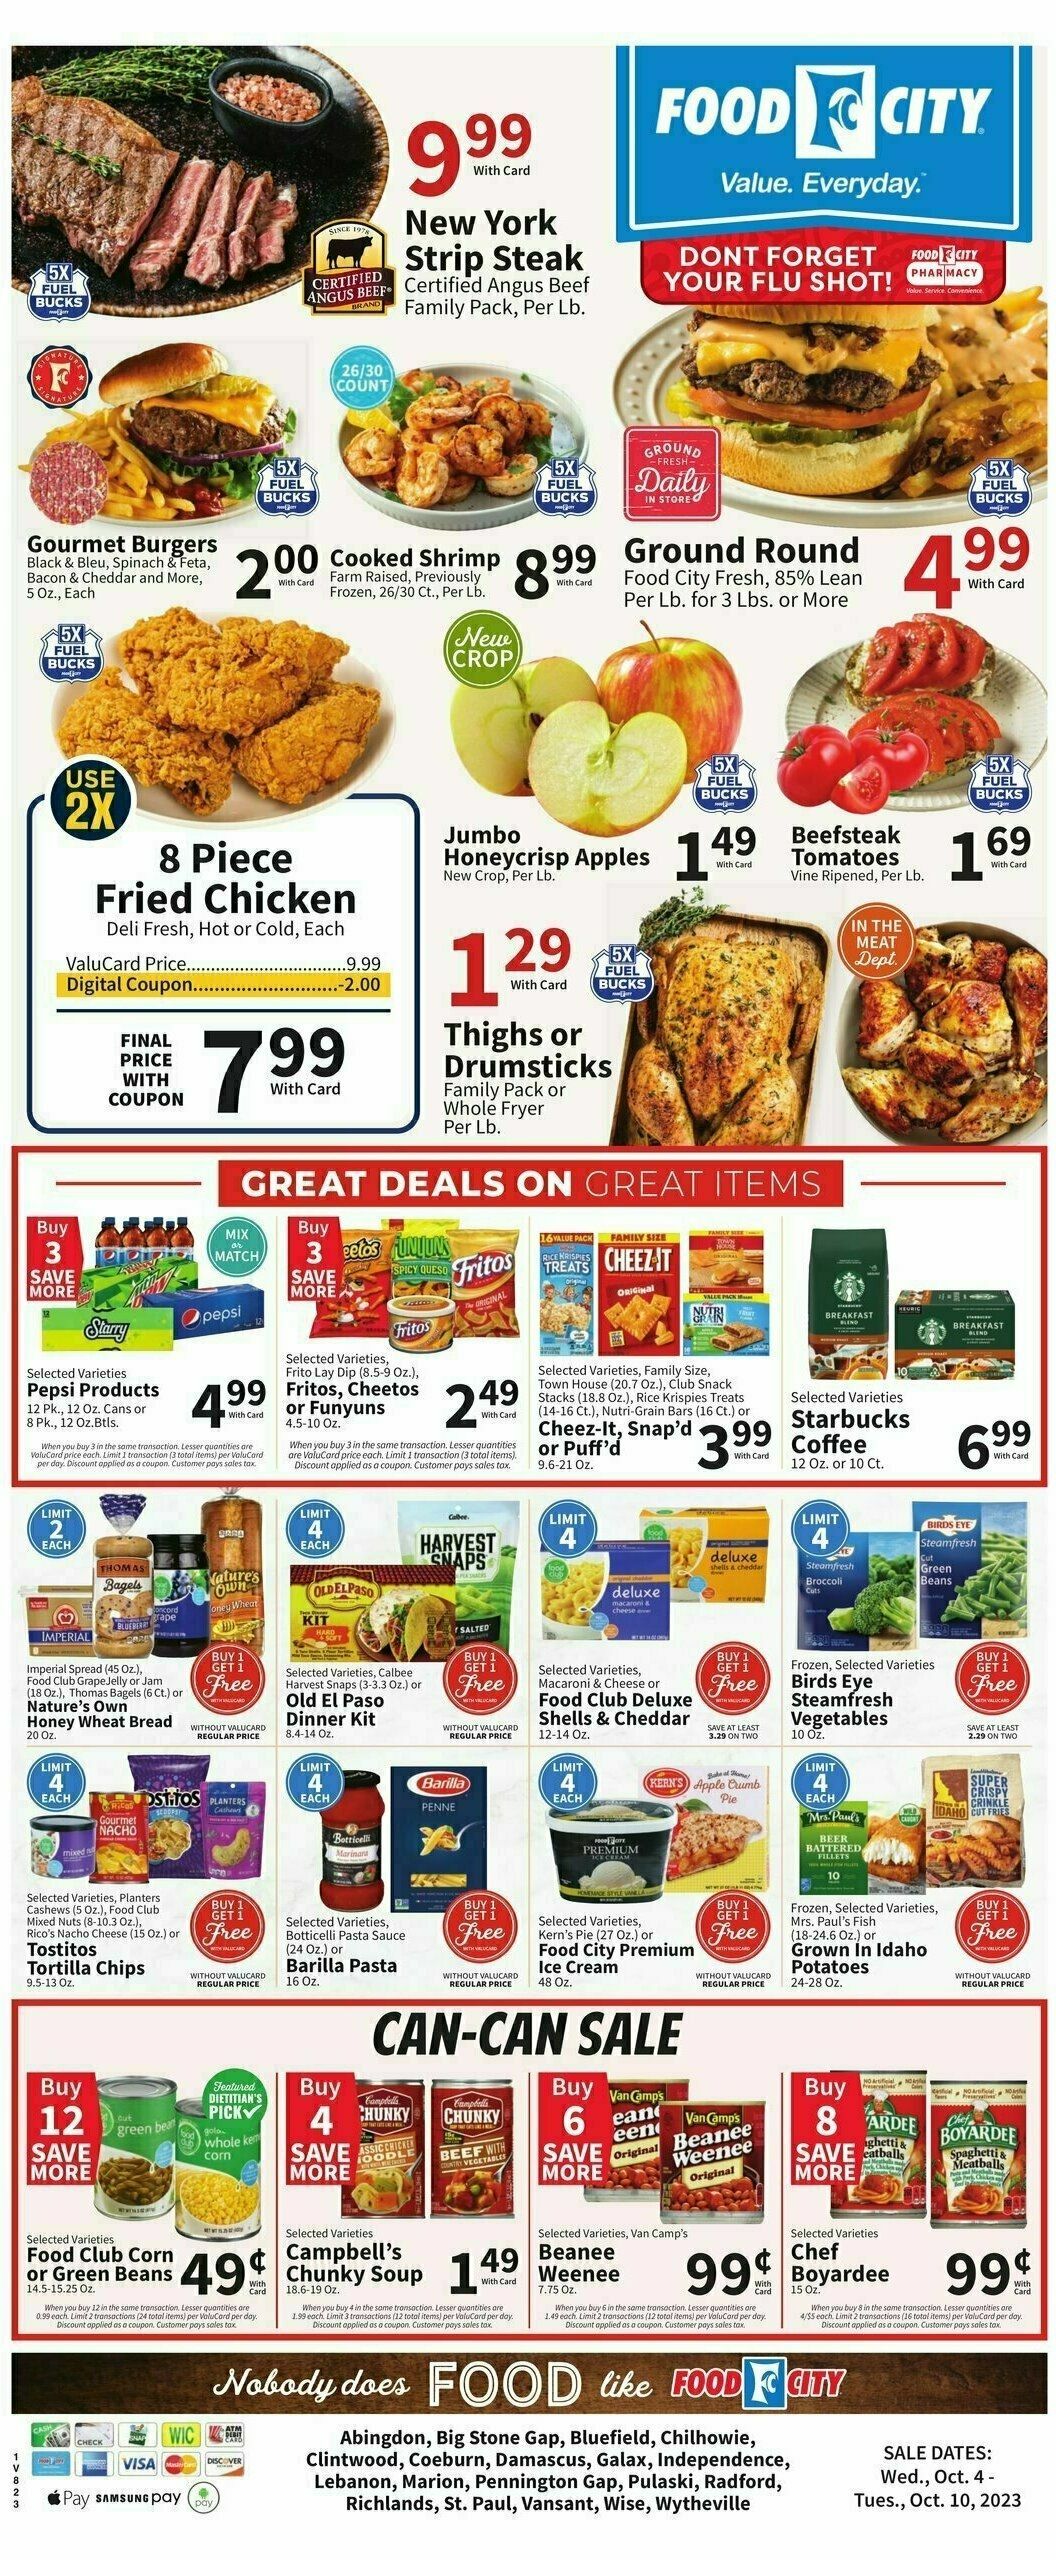 Food City Weekly Ad from October 4